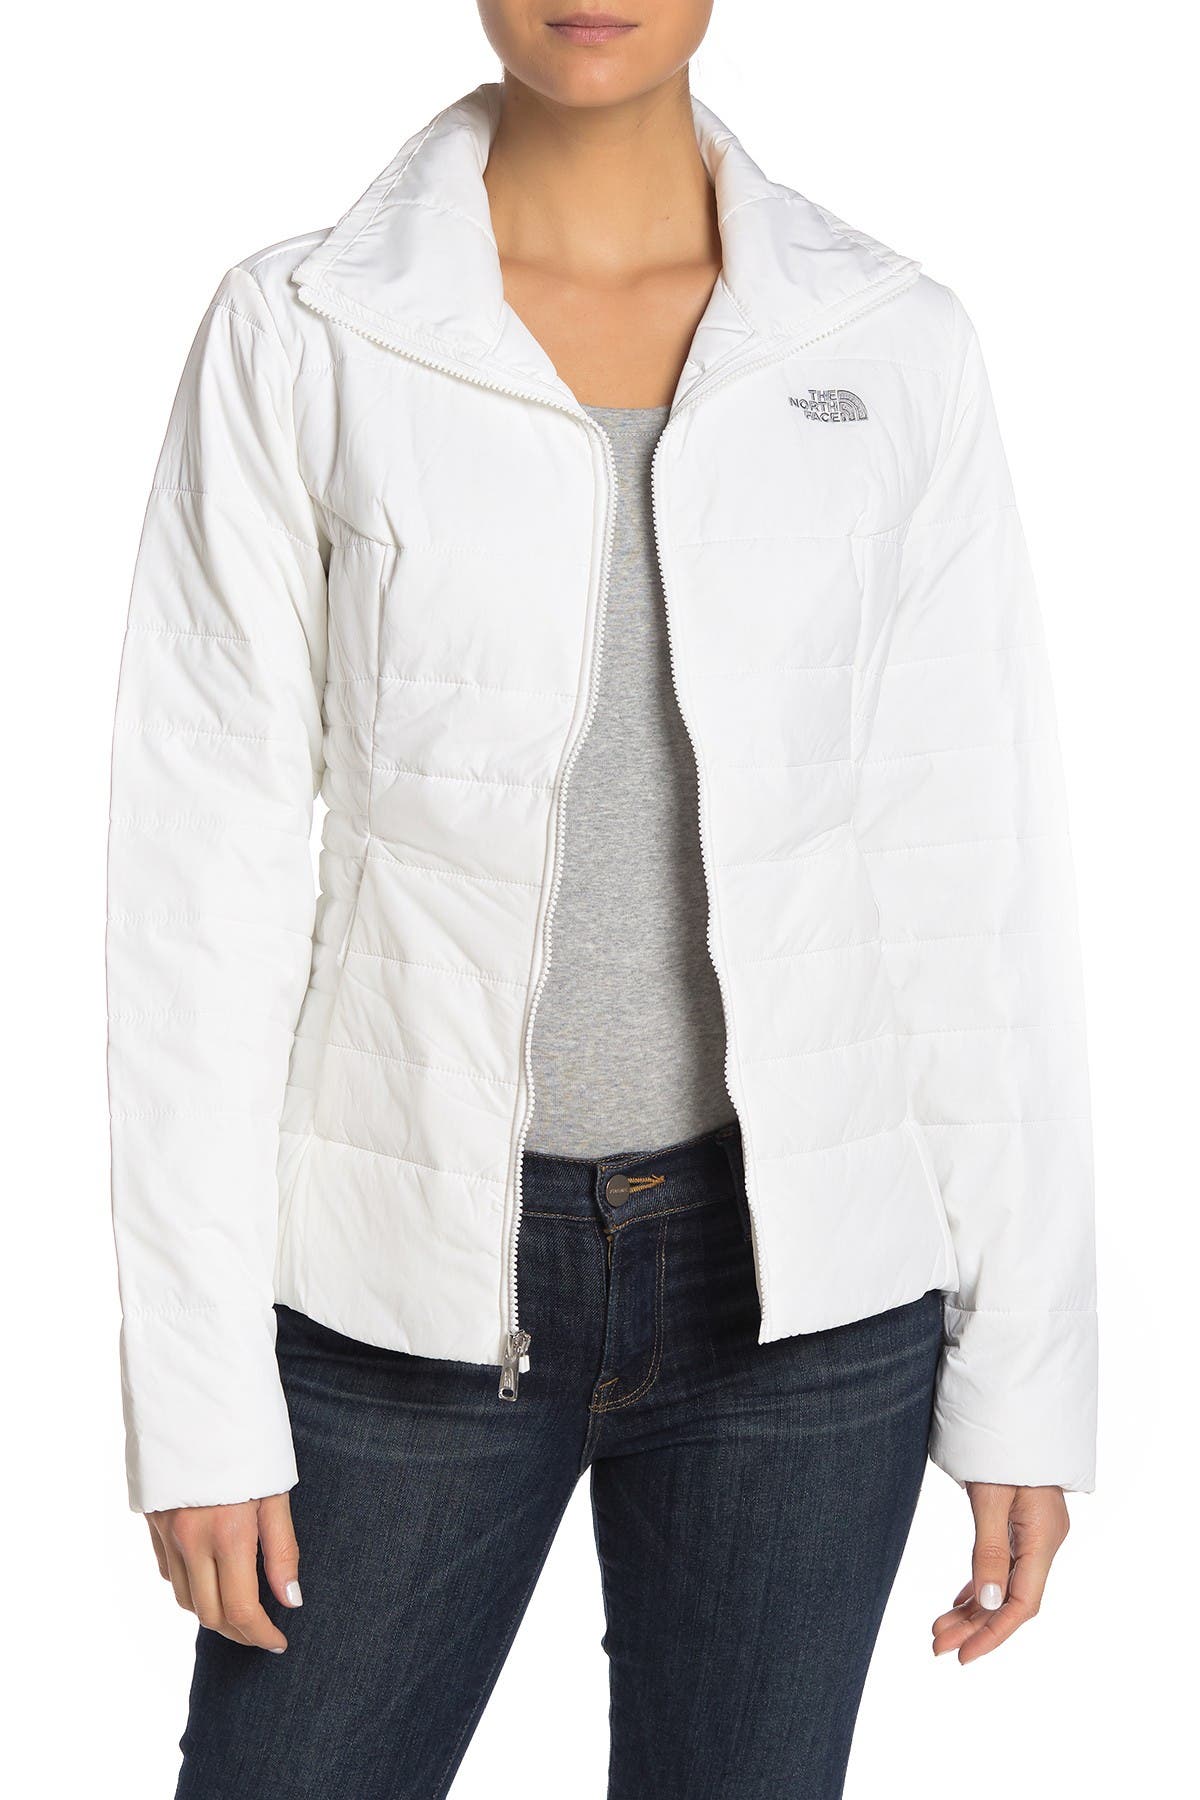 the north face women's harway jacket